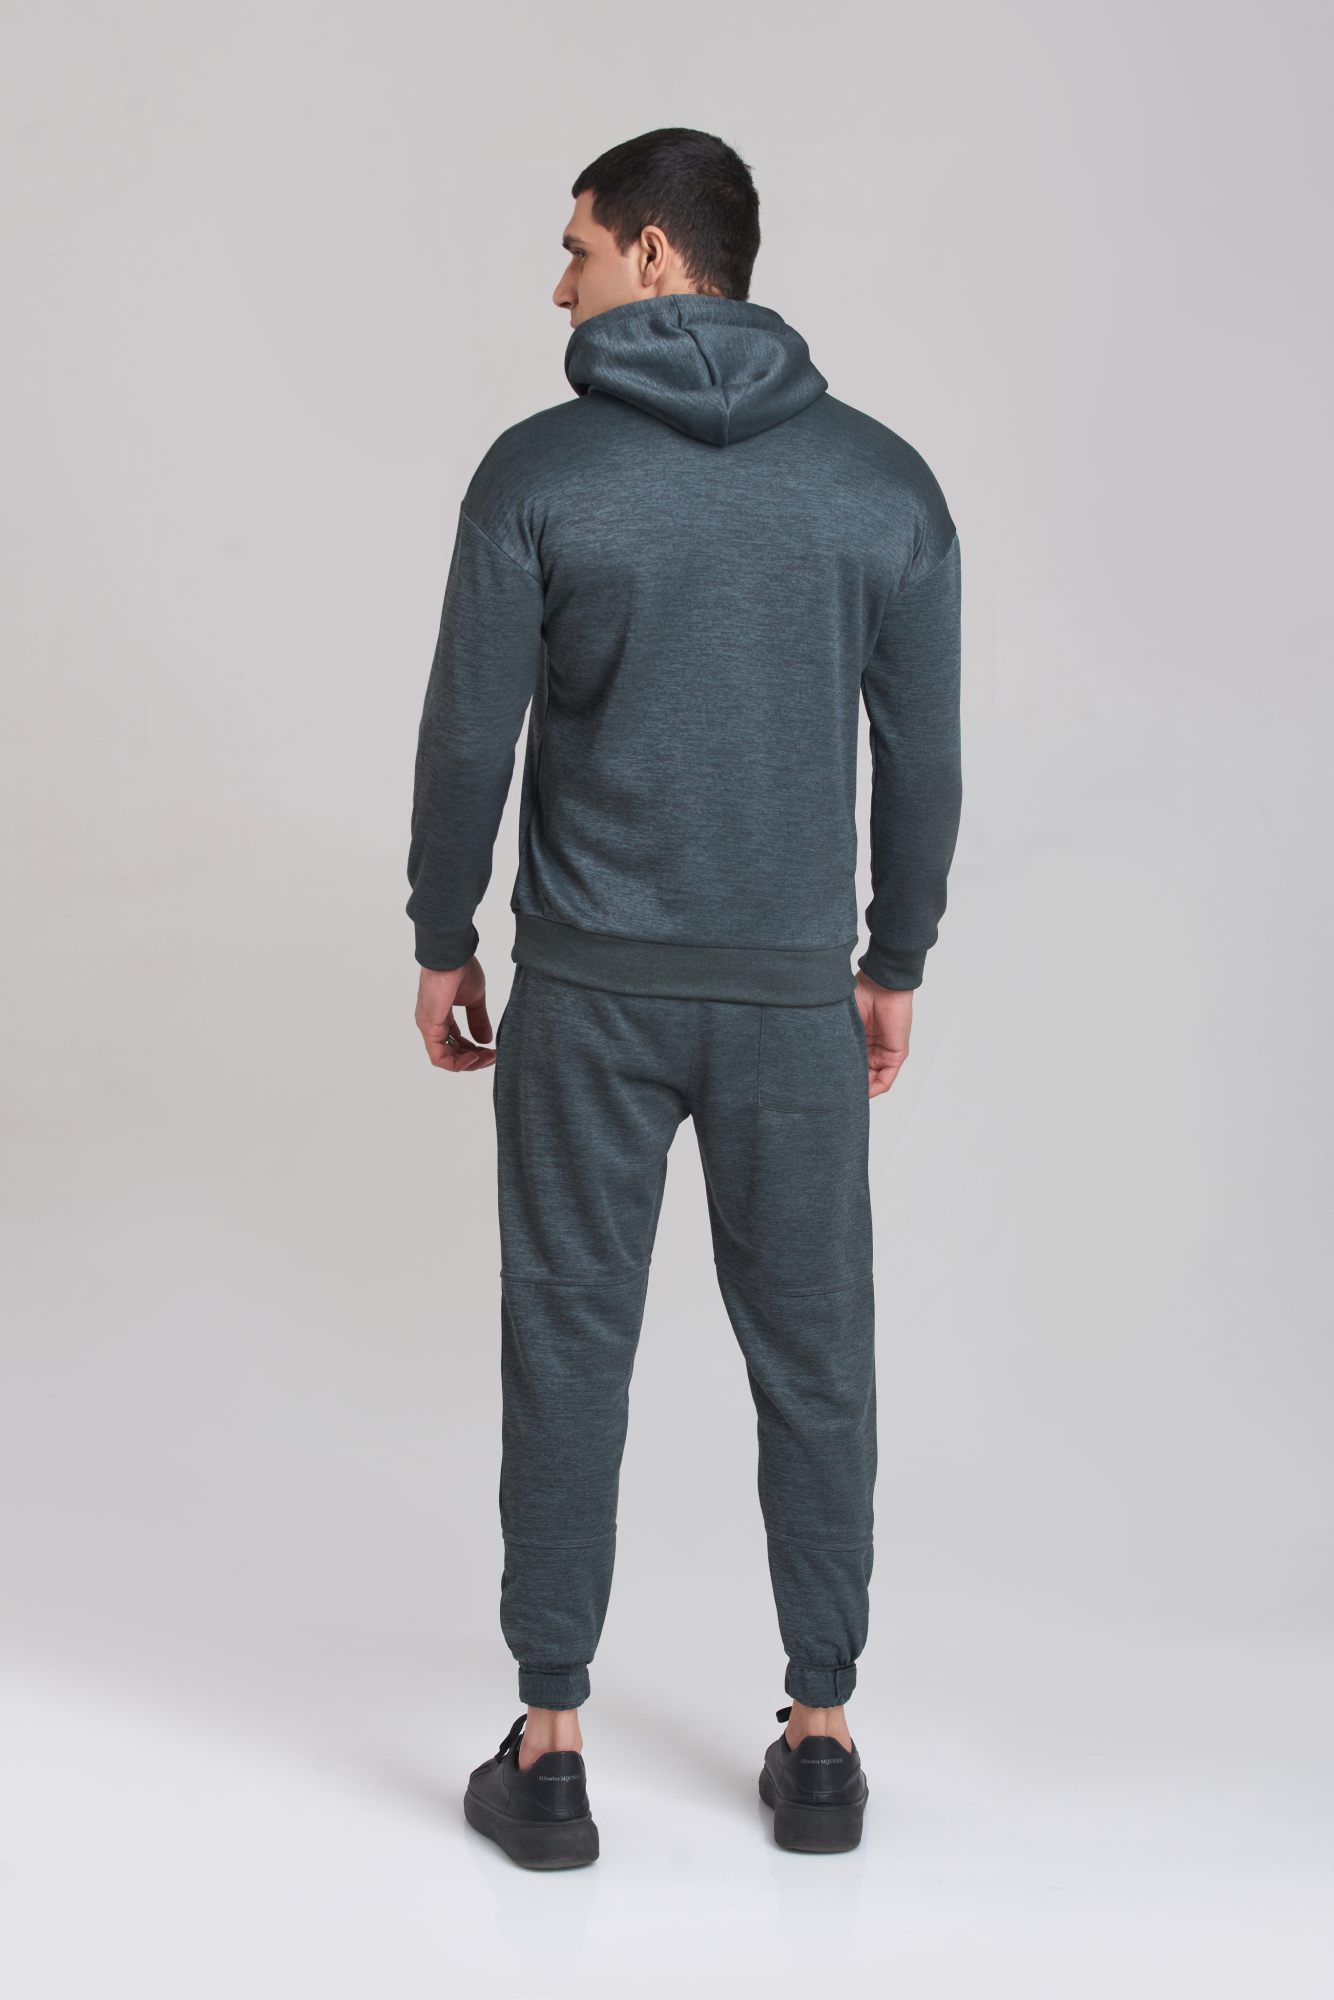 Braves-Vibes Charcoal Hoody Tracksuit - Men